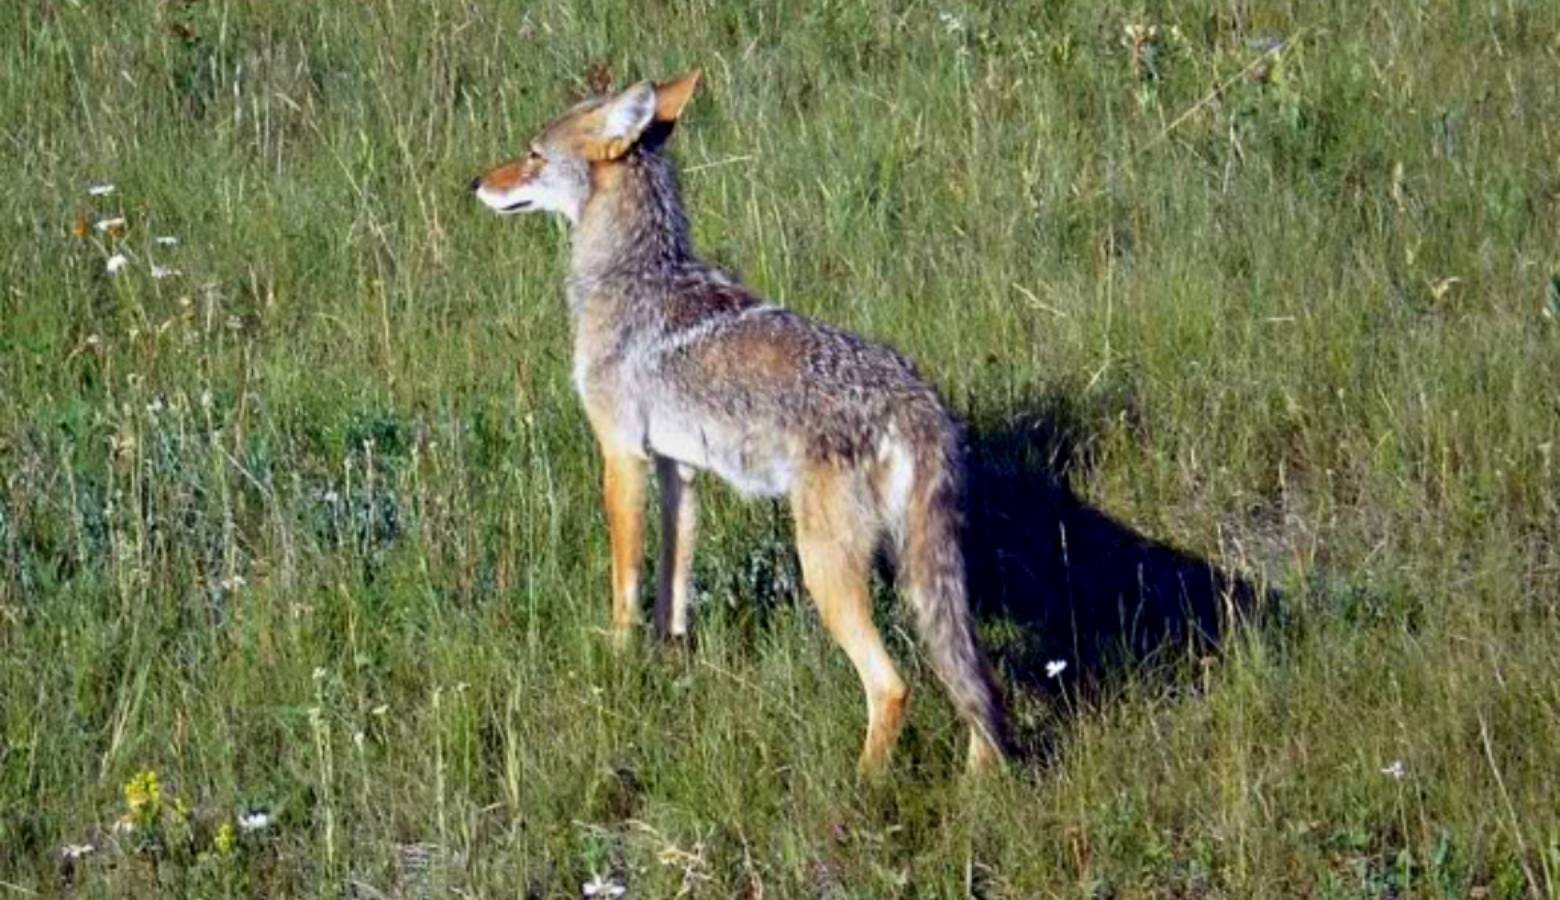 A coyote along the roadside near Kootenay National Park in British Columbia, Canada in 2009. (Ron Clausen/Wikimedia Commons)